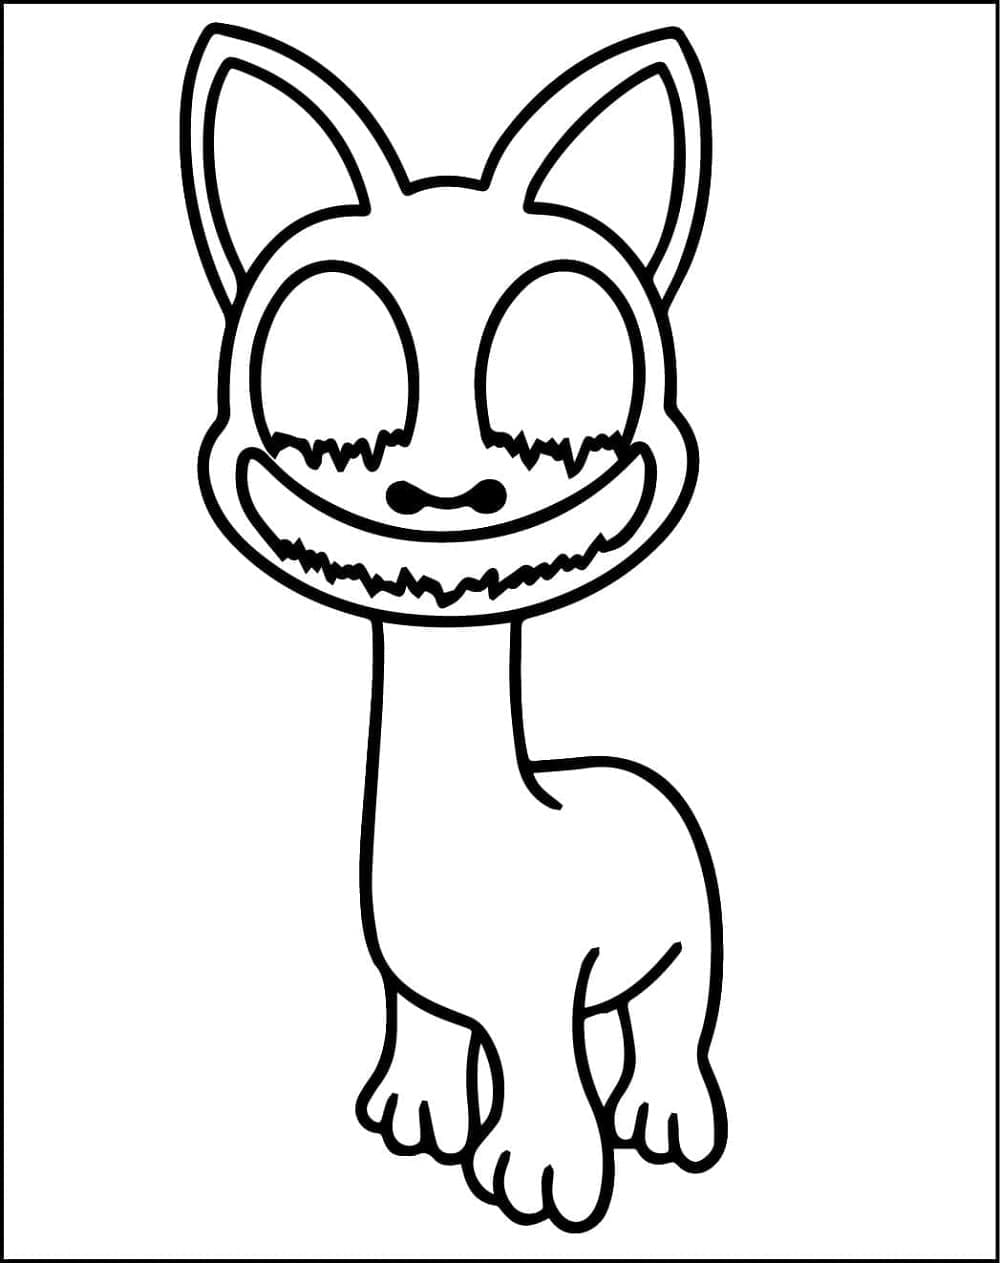 Printable Smile Cat in Zoonomaly Coloring Page